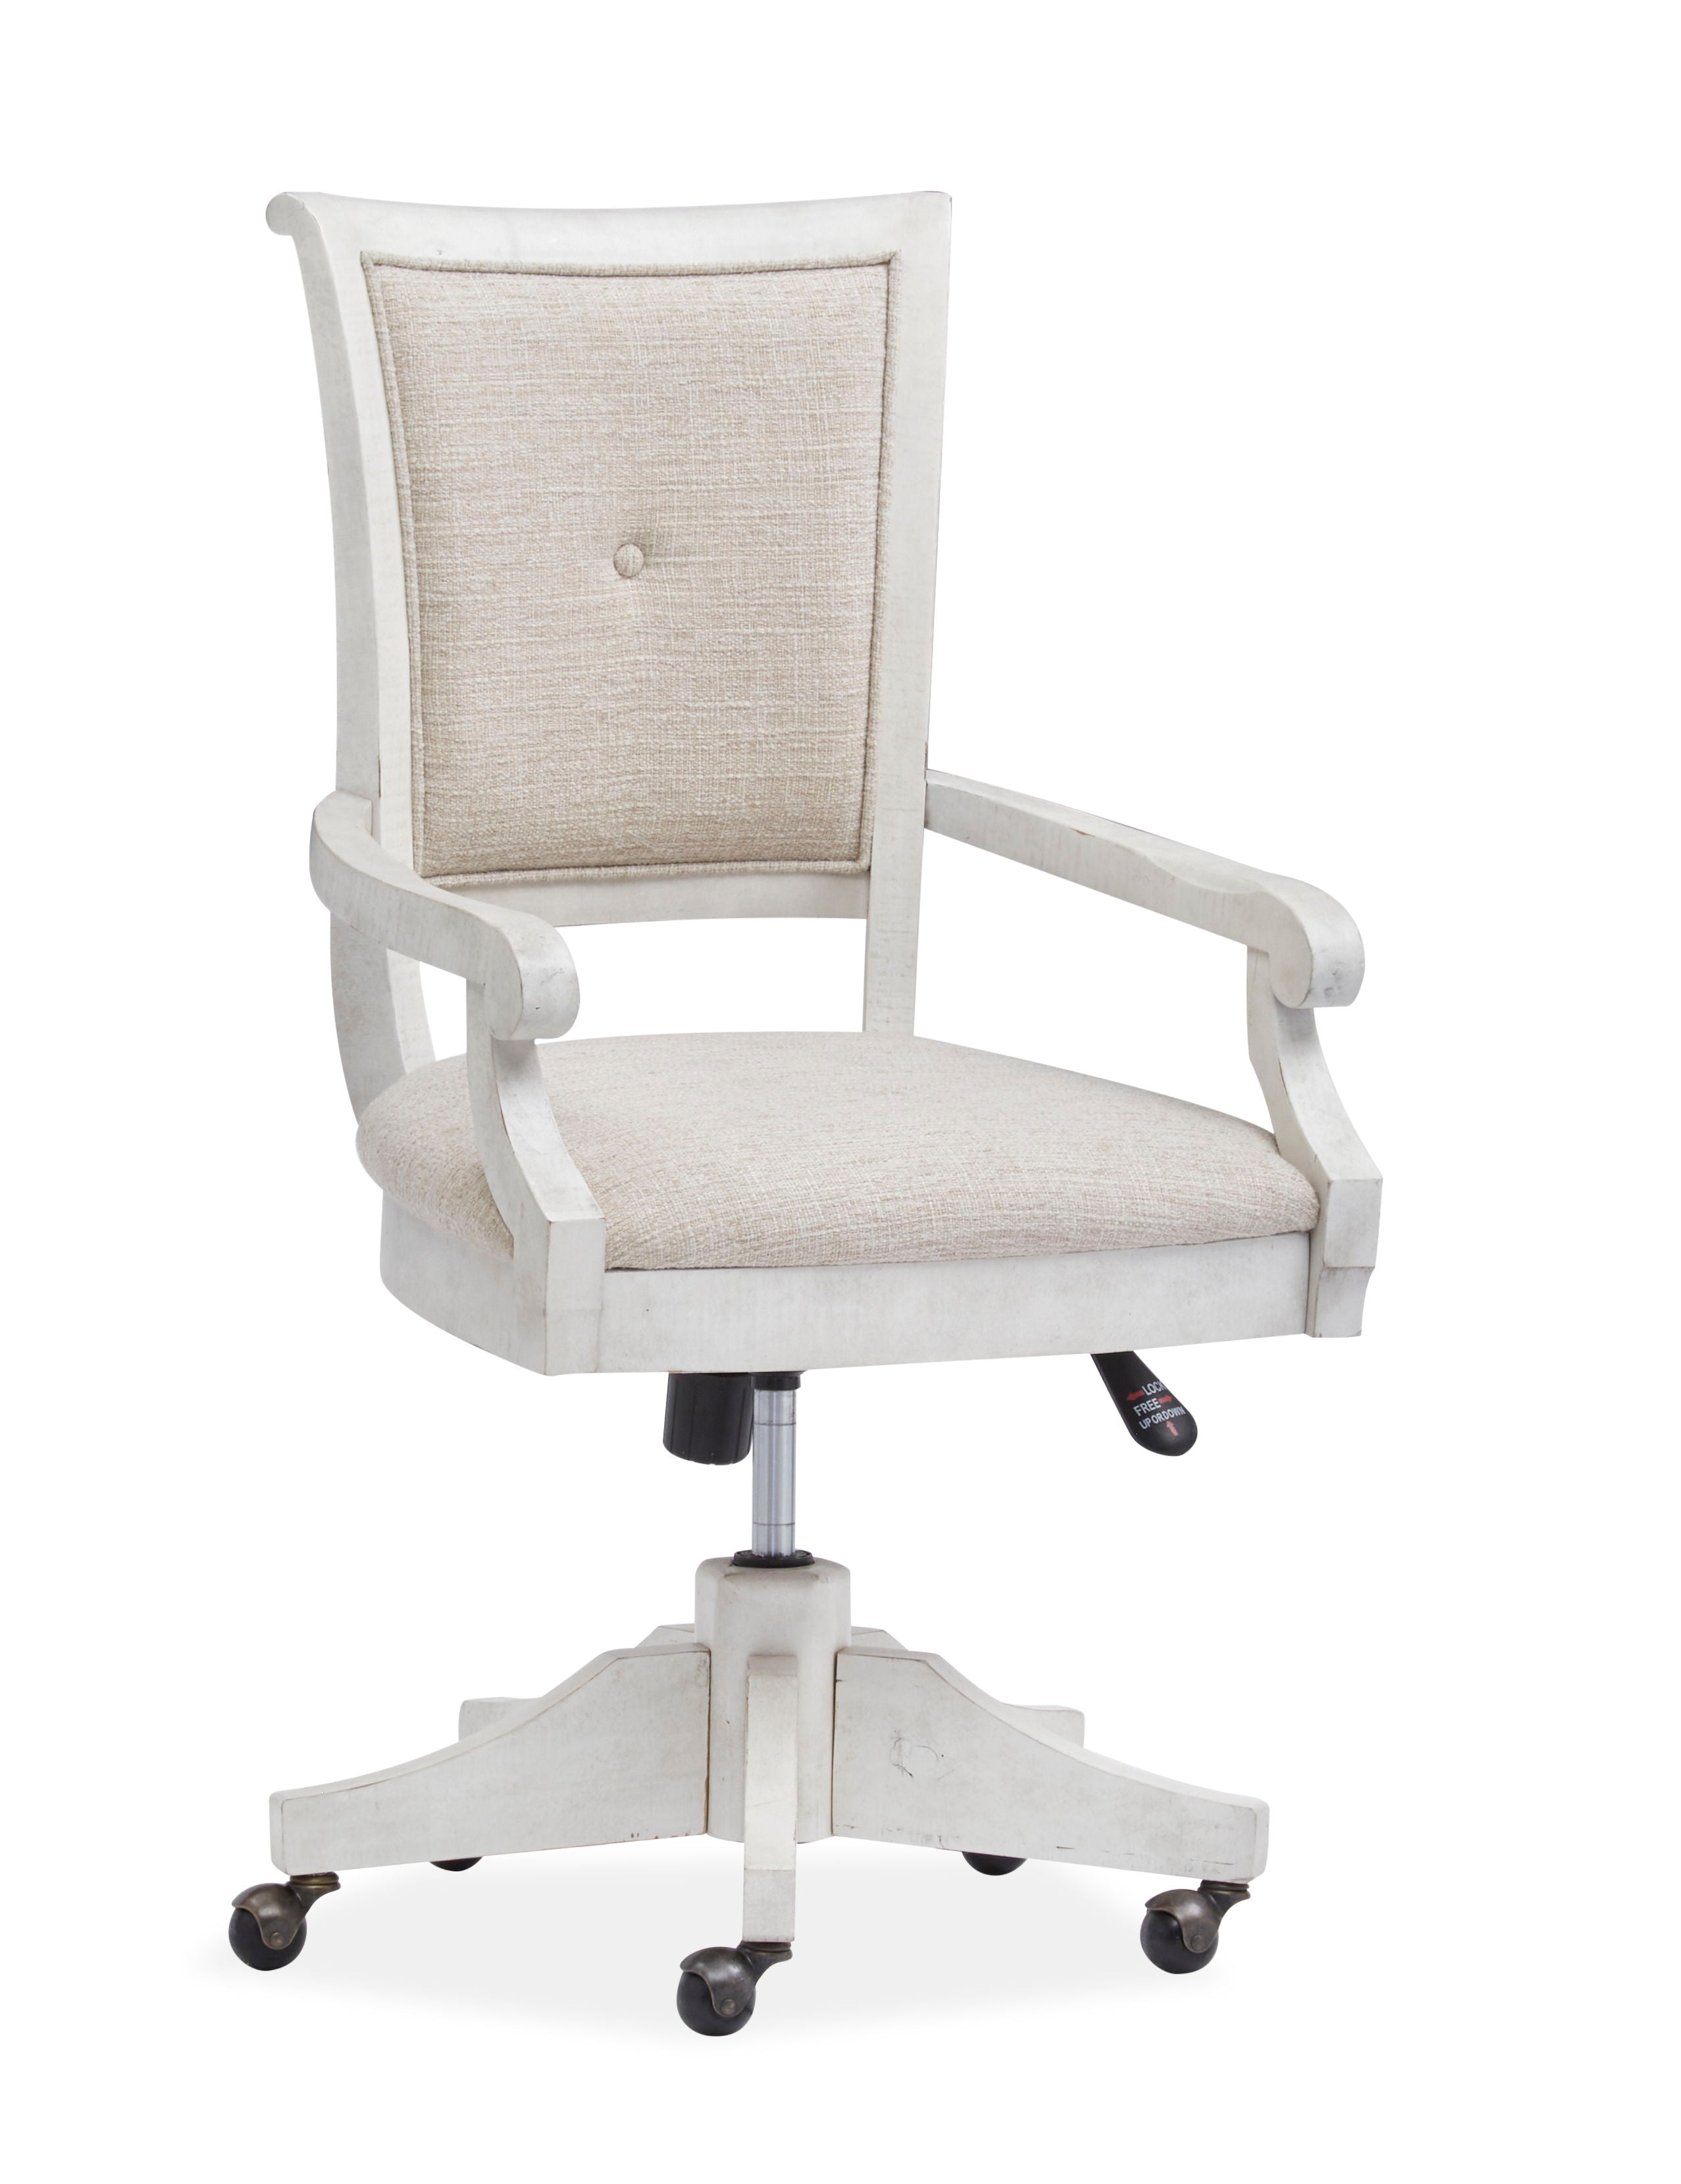 Newport - Fully Upholstered Swivel Chair - Alabaster